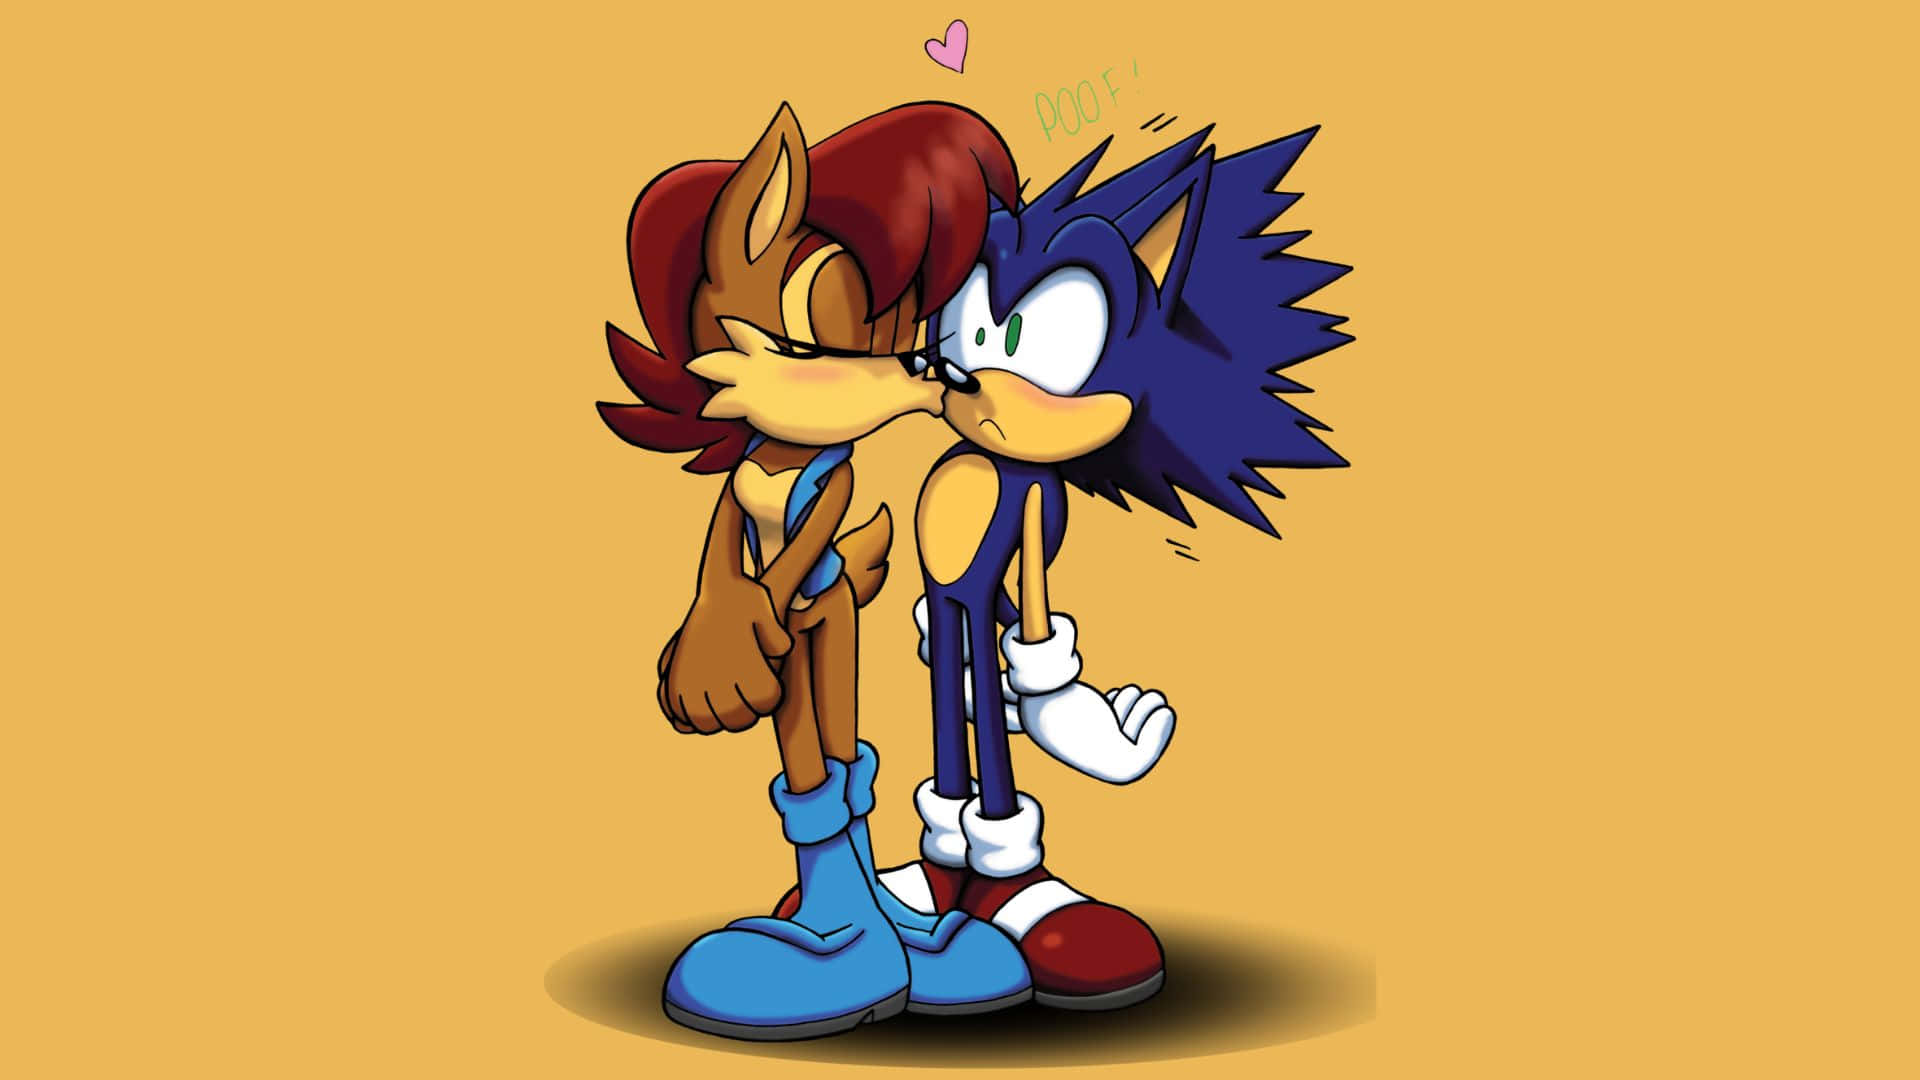 Sonic and Sally sharing a special moment together Wallpaper